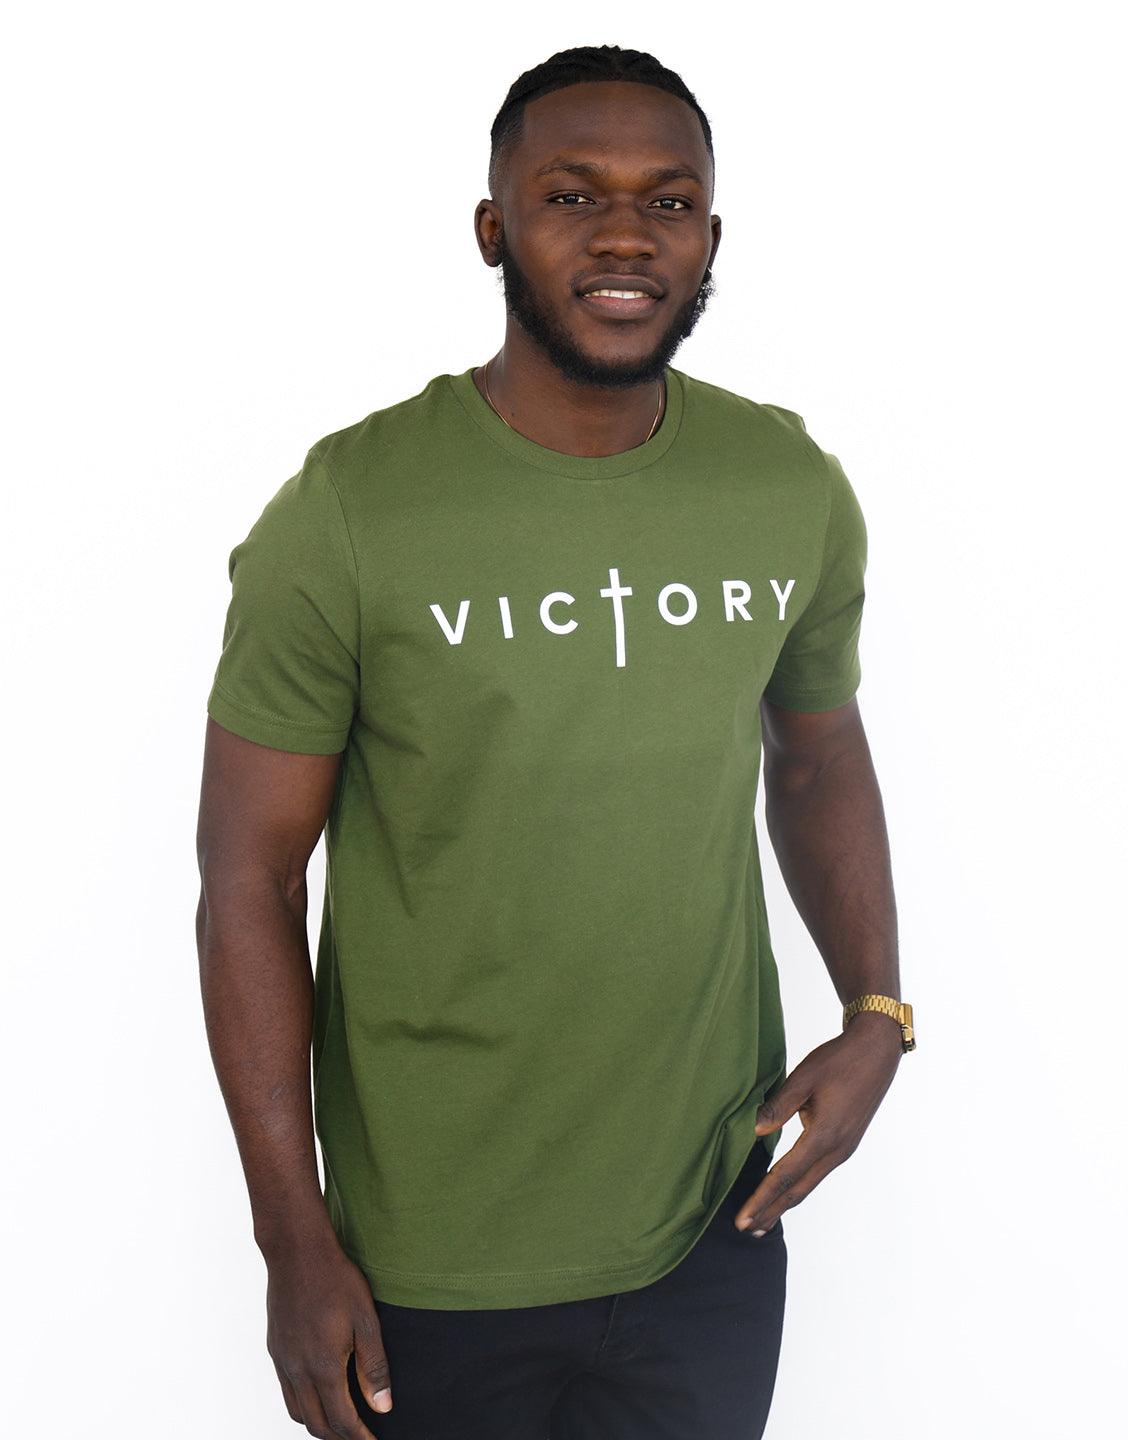 Victory Olive Green T Shirt - VOTC Clothing